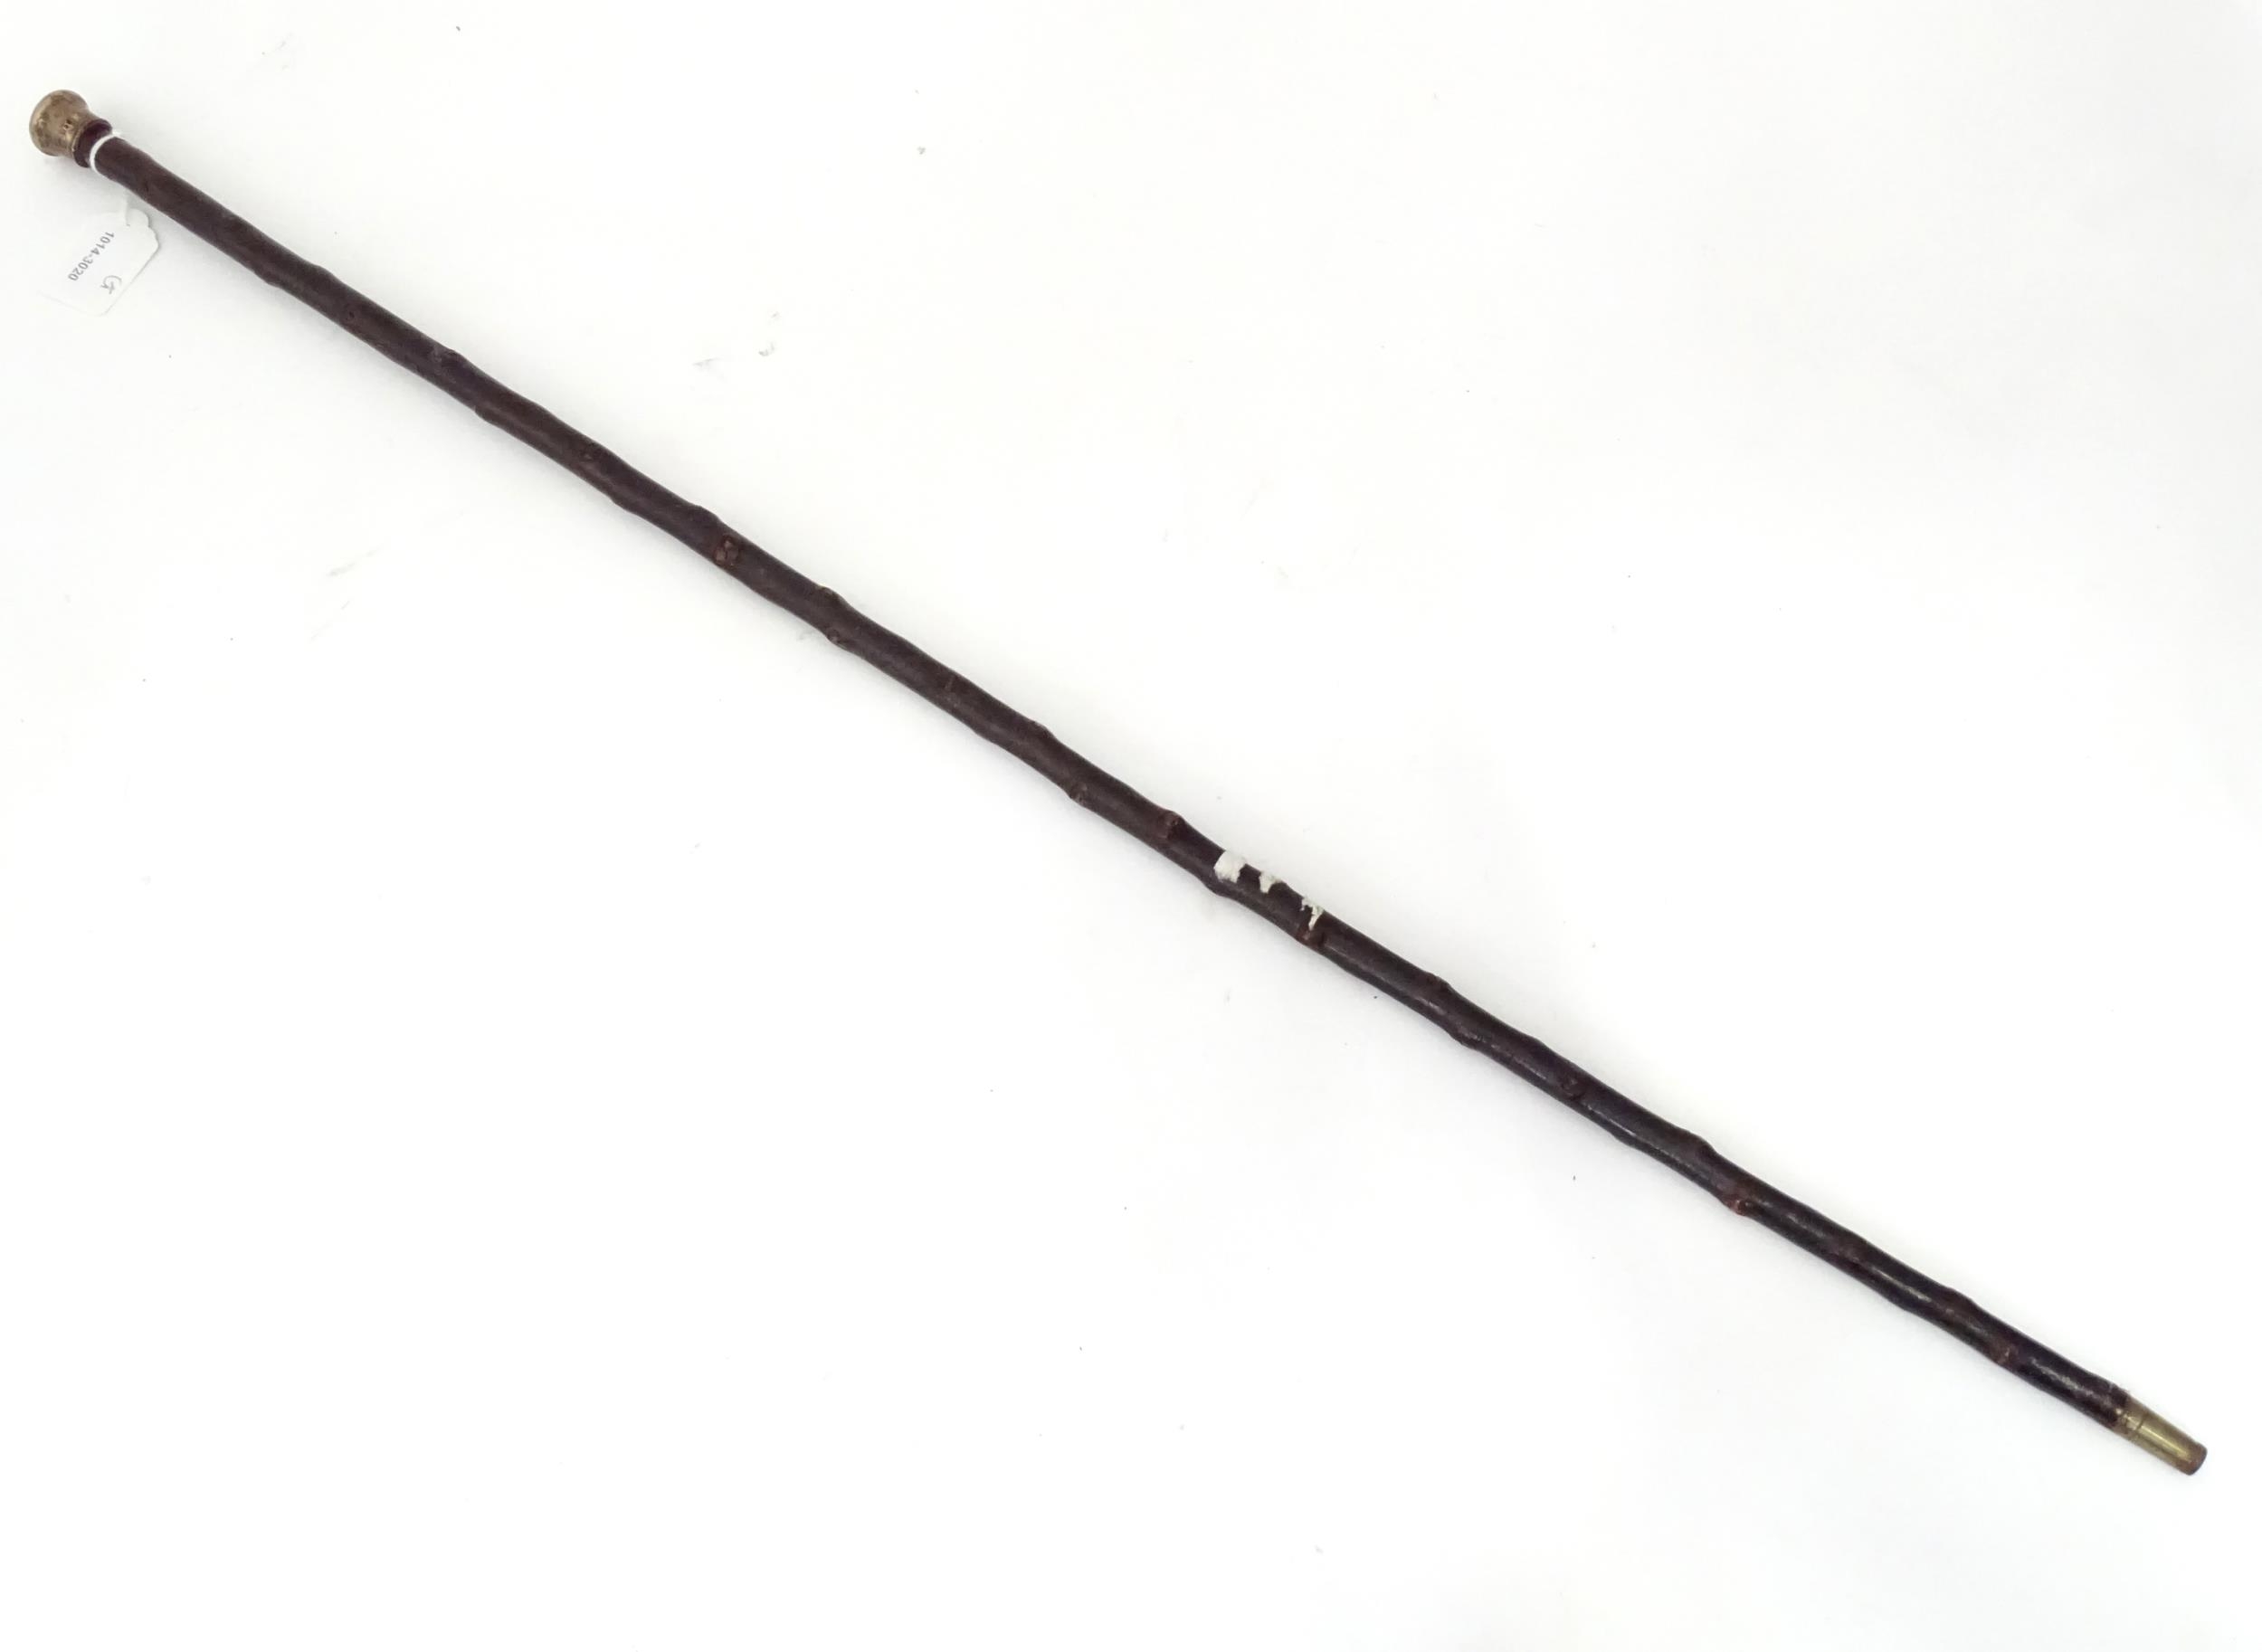 Walking stick / cane : A wooden stick with silver top hallmarked London 1900. 34 1/2" long Please